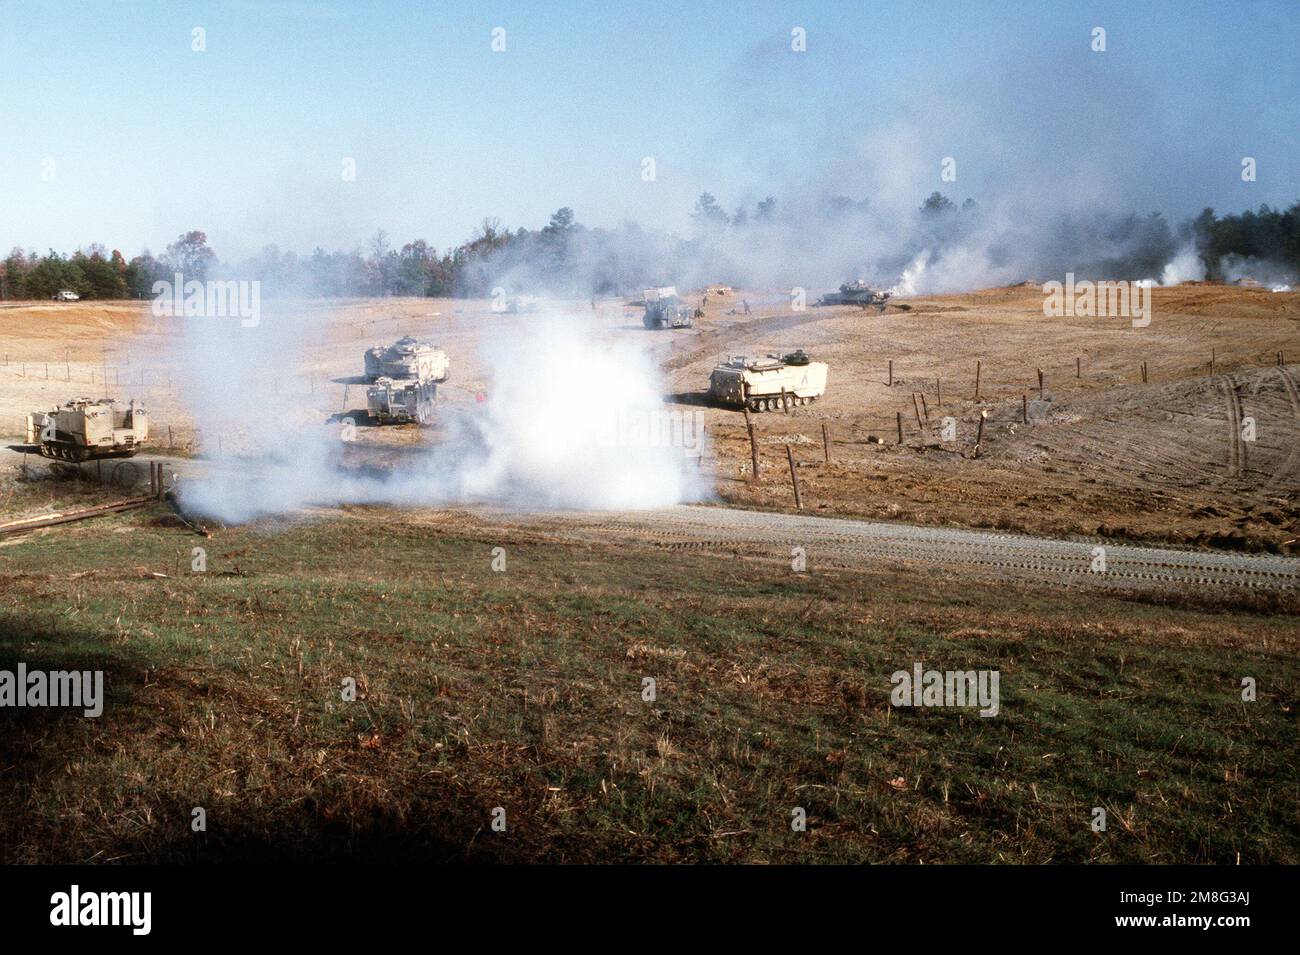 Elements of B Company, 2nd Combat Engineer Battalion (CEB), 2nd Marine Division, advance through a mechanical assault range during a training exercise. The vehicles include two M-9 armored combat earthmovers, four AAV-7A1 amphibious assault vehicles and two M-1A1 Abrams main battle tanks. The two AAV-7A1s in the foreground are fitted with mine clearance kits (MCSKs). Base: Fort A. P. Hill State: Virginia (VA) Country: United States Of America (USA) Stock Photo